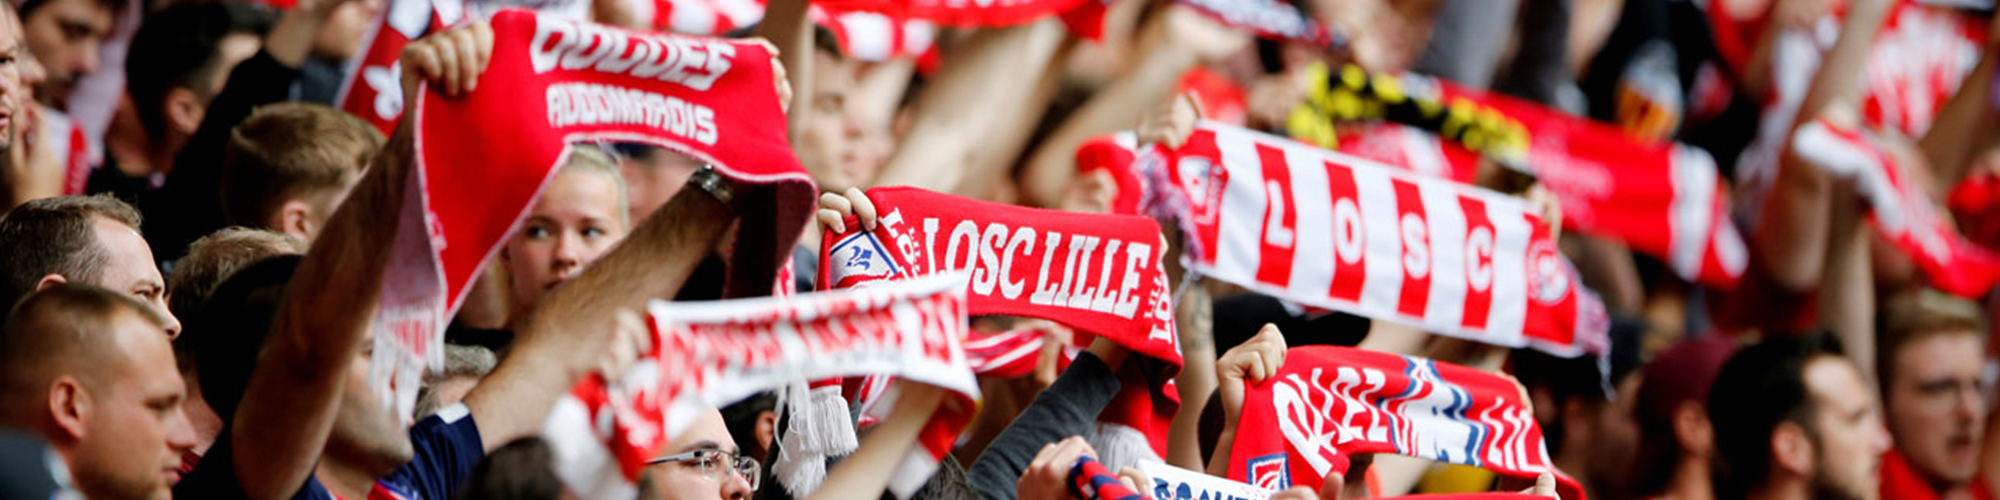 LOSC Lille Tickets & Experiences